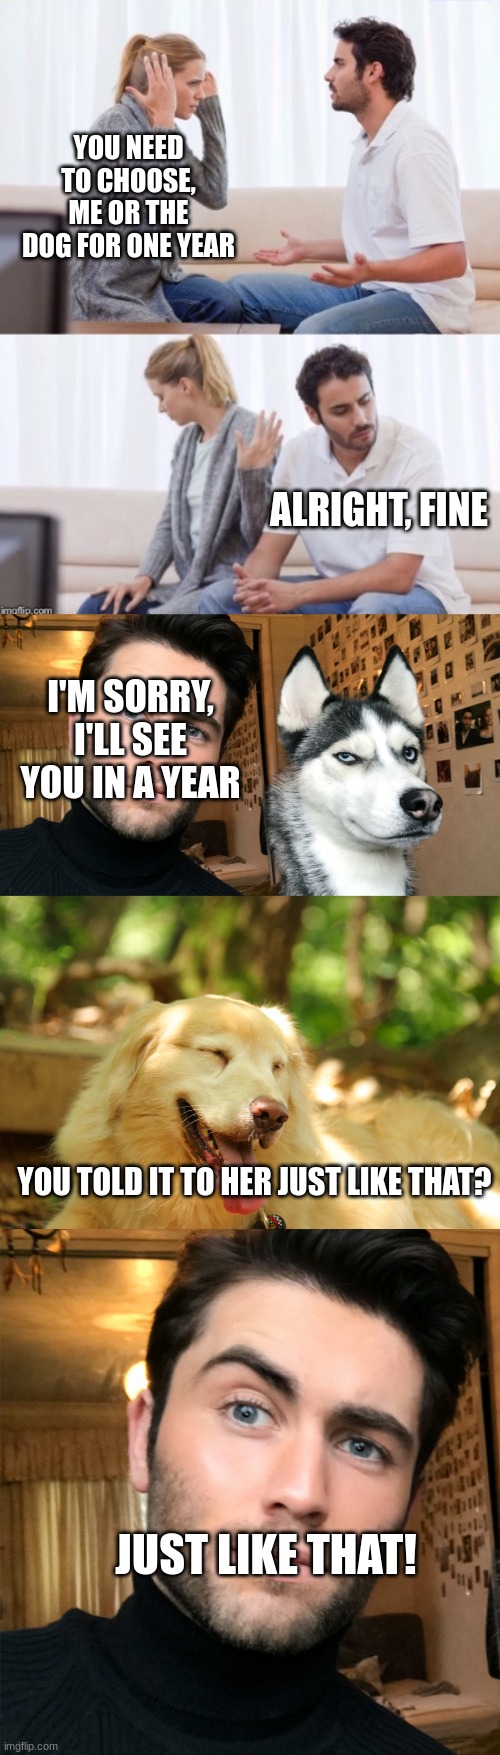 LOL!!! | YOU NEED TO CHOOSE, ME OR THE DOG FOR ONE YEAR; ALRIGHT, FINE; I'M SORRY, I'LL SEE YOU IN A YEAR; YOU TOLD IT TO HER JUST LIKE THAT? JUST LIKE THAT! | image tagged in arguing couple 2,man and dog,dog laughing,oof | made w/ Imgflip meme maker